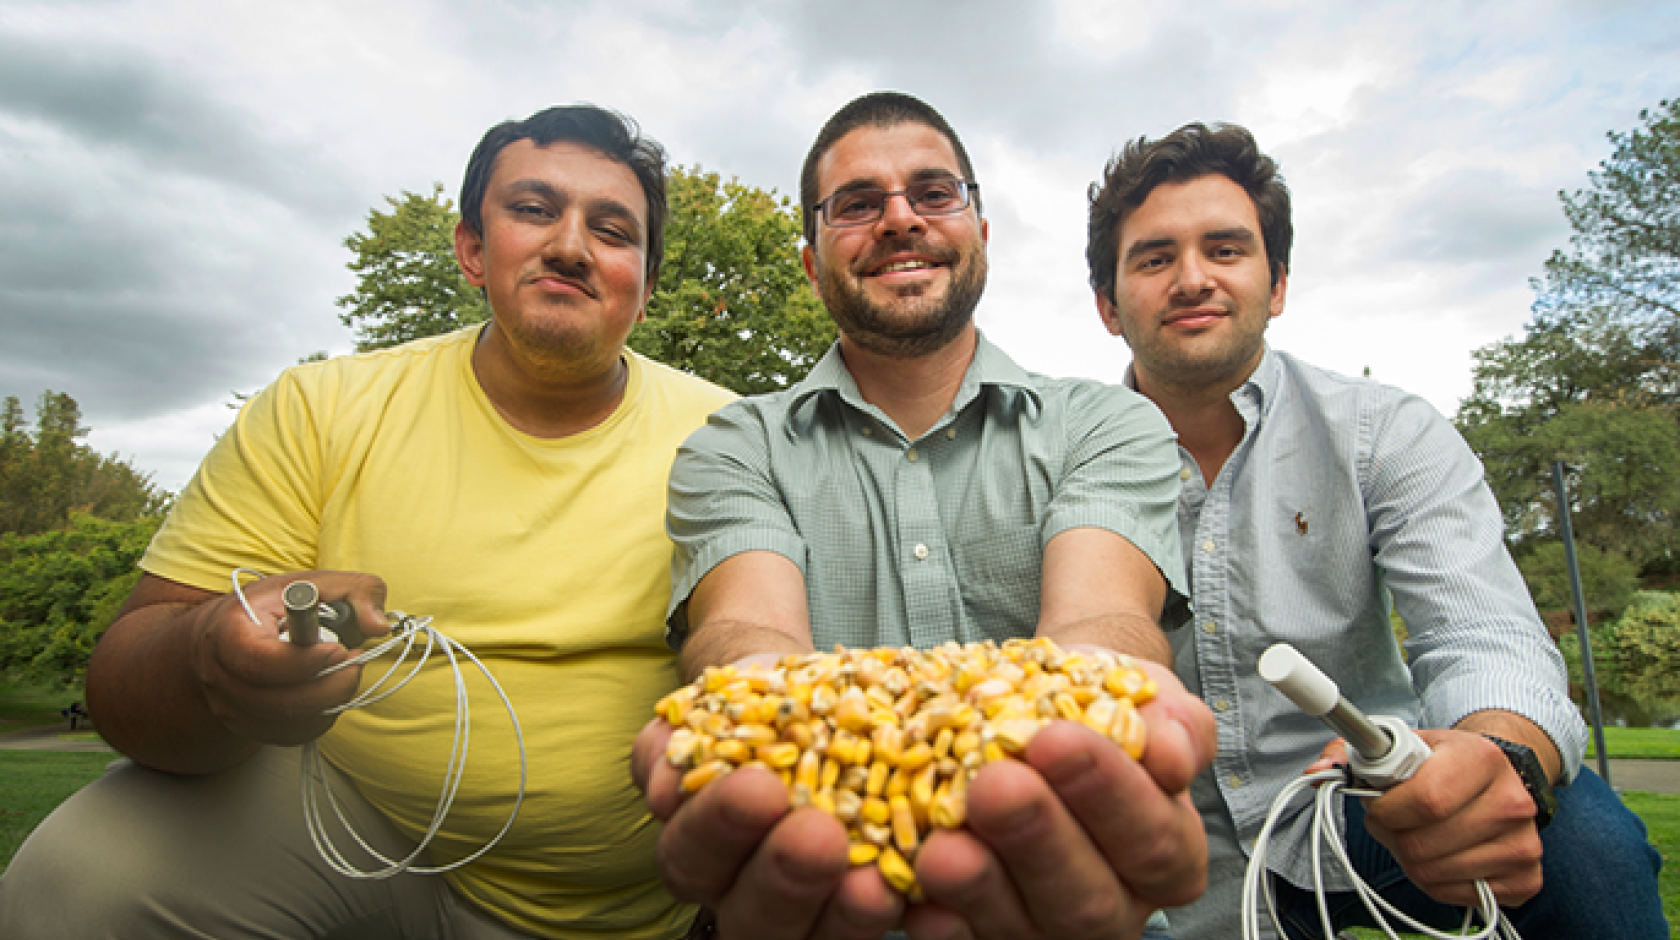 The winning team in the UC World Food Day Video Challenge: (From left) Umayr Sufi, Irwin Donis-Gonzalez and Carlos Orozco-Gonzalez.